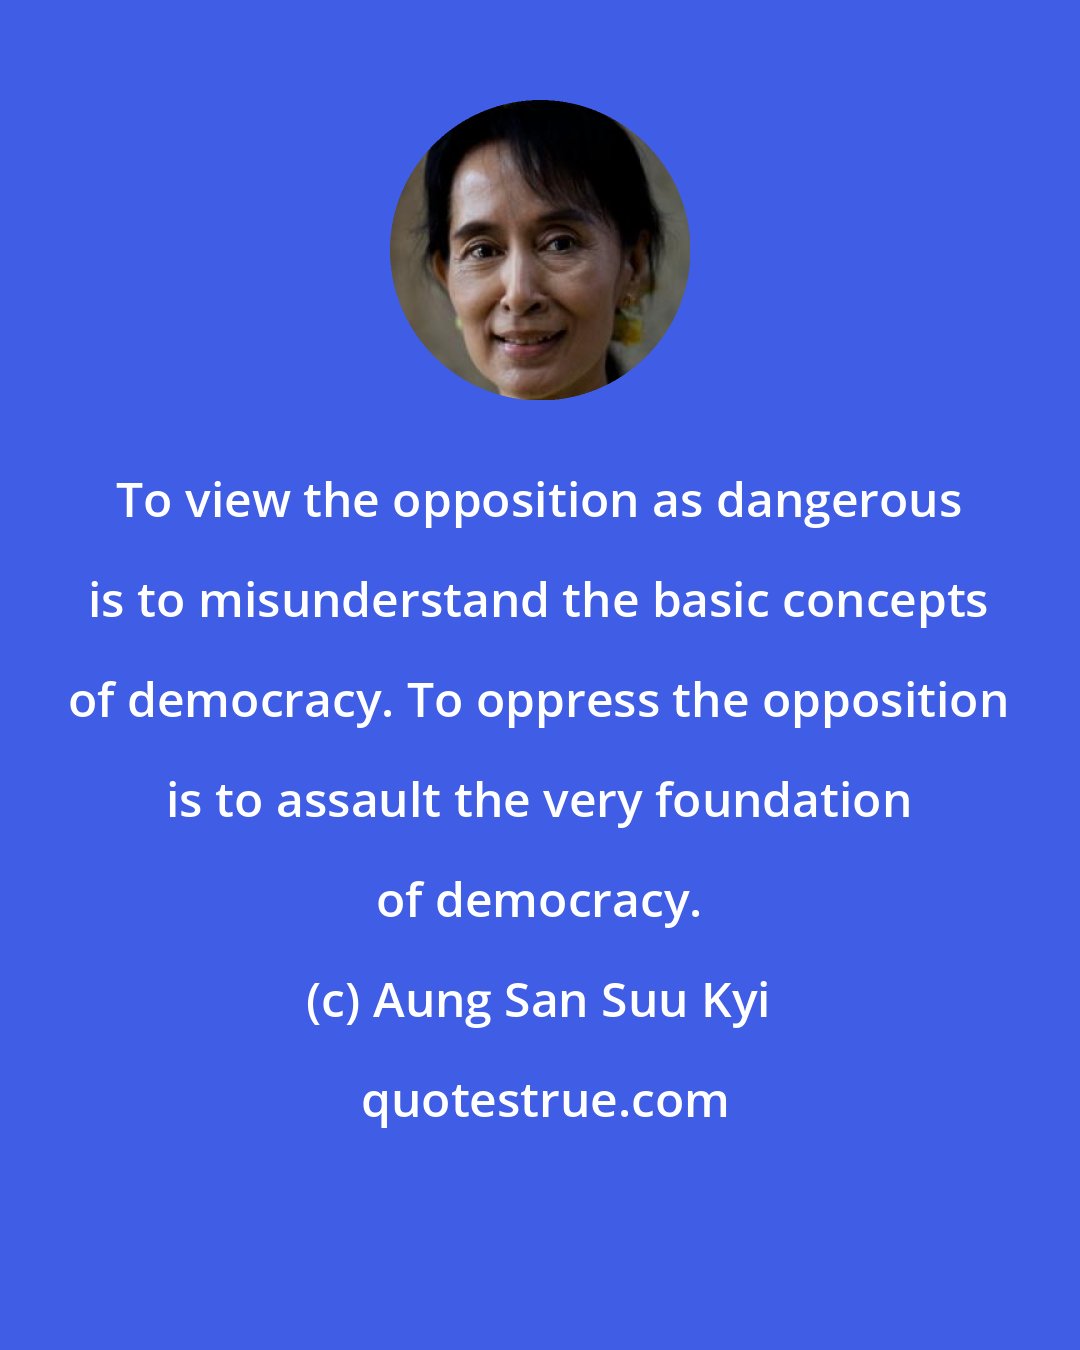 Aung San Suu Kyi: To view the opposition as dangerous is to misunderstand the basic concepts of democracy. To oppress the opposition is to assault the very foundation of democracy.